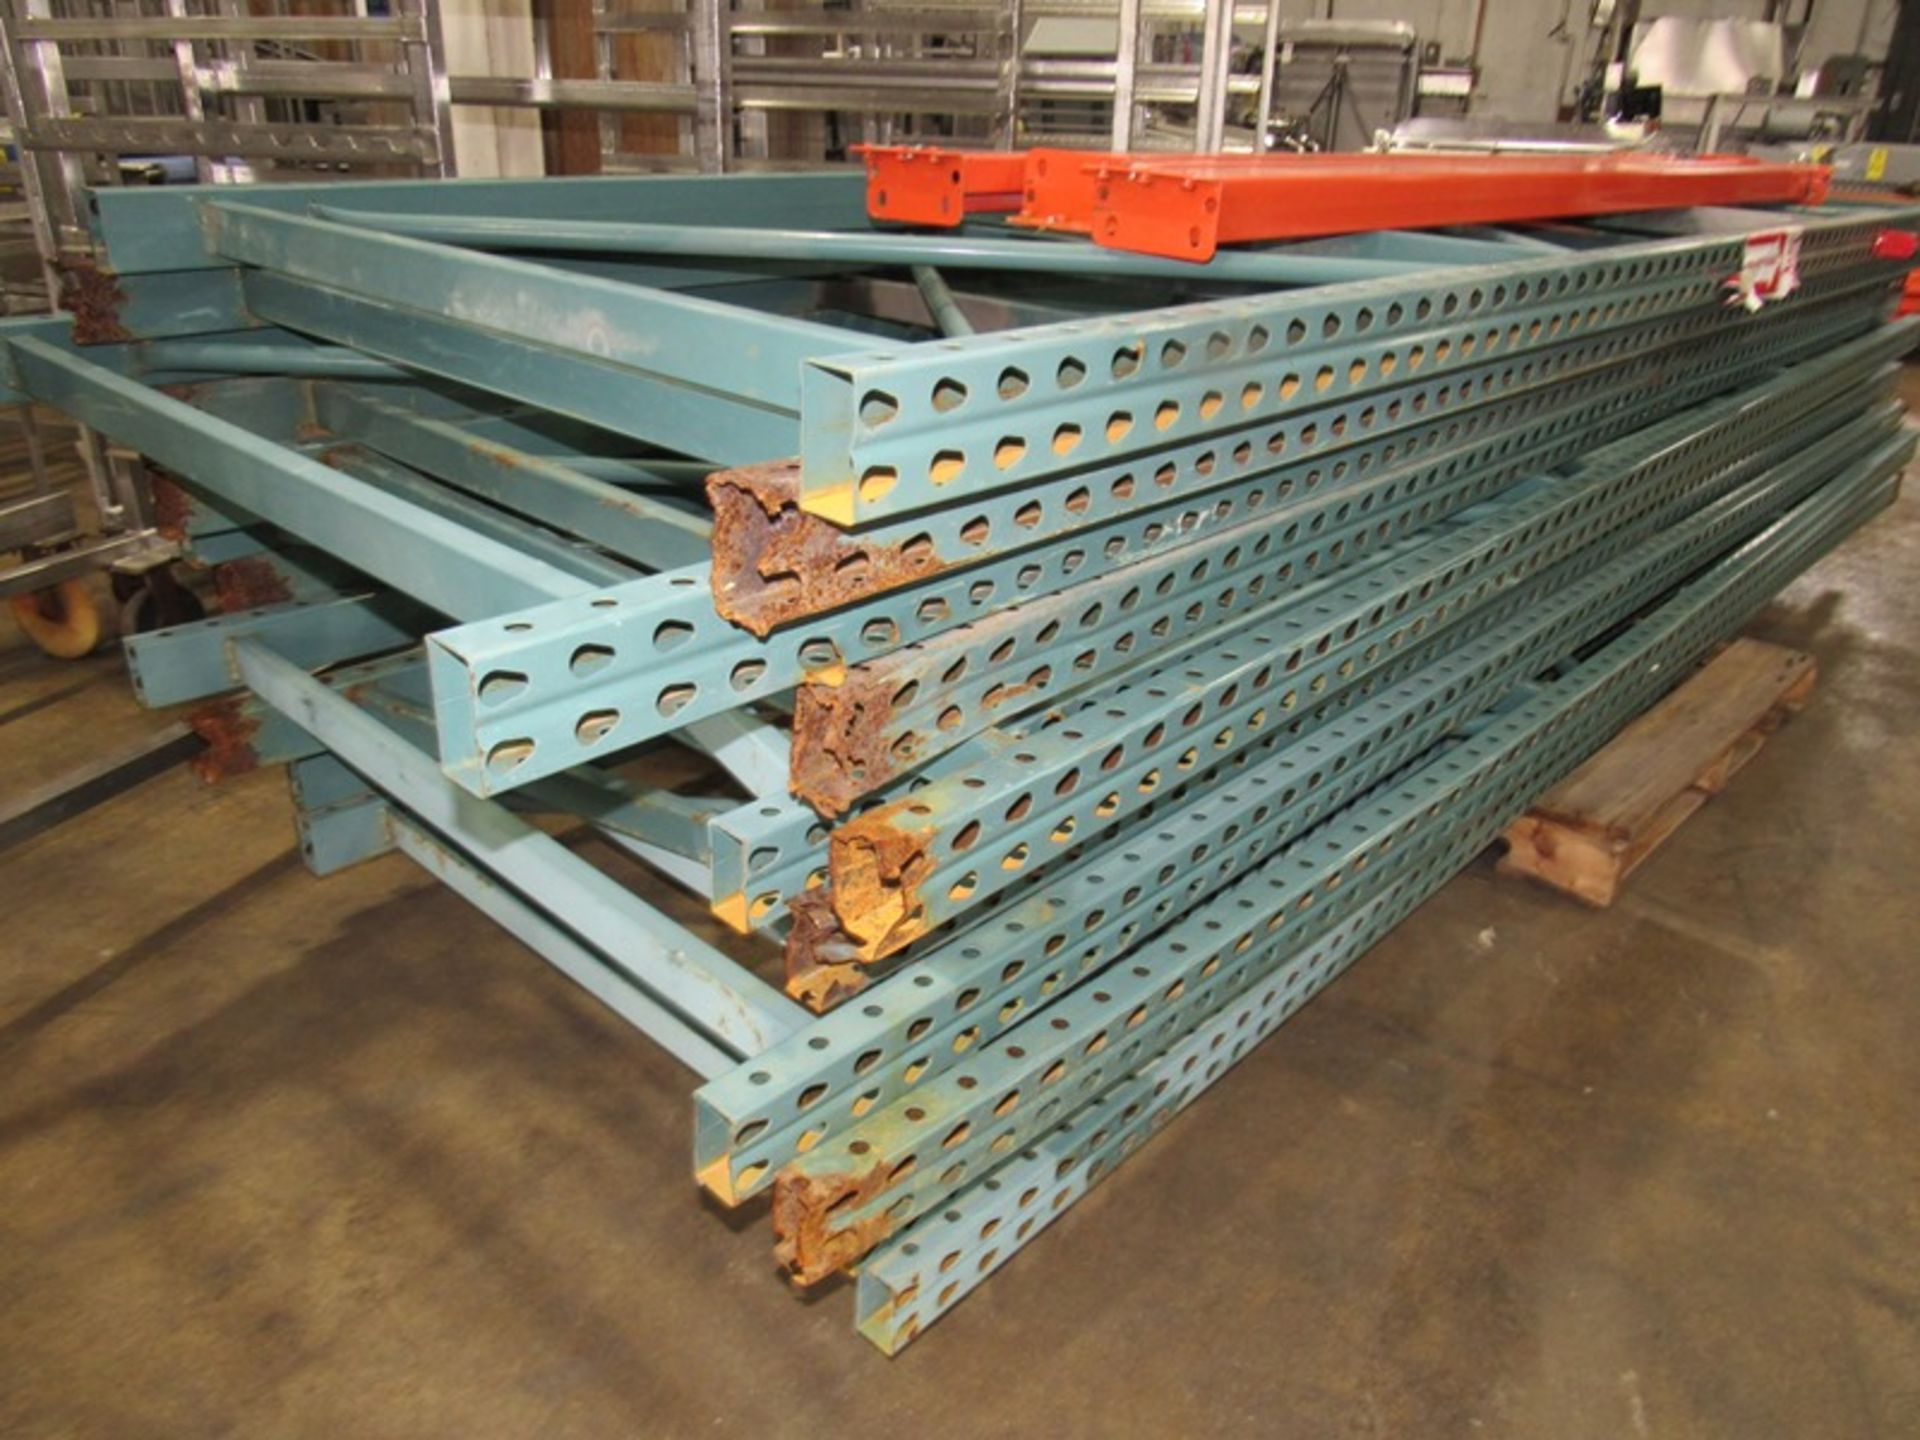 Lot Pallet Racking (12) Uprights 42" W X 12' T, 60 Crossbeams 8' wide (Located in Plano, IL) Removal - Image 2 of 4